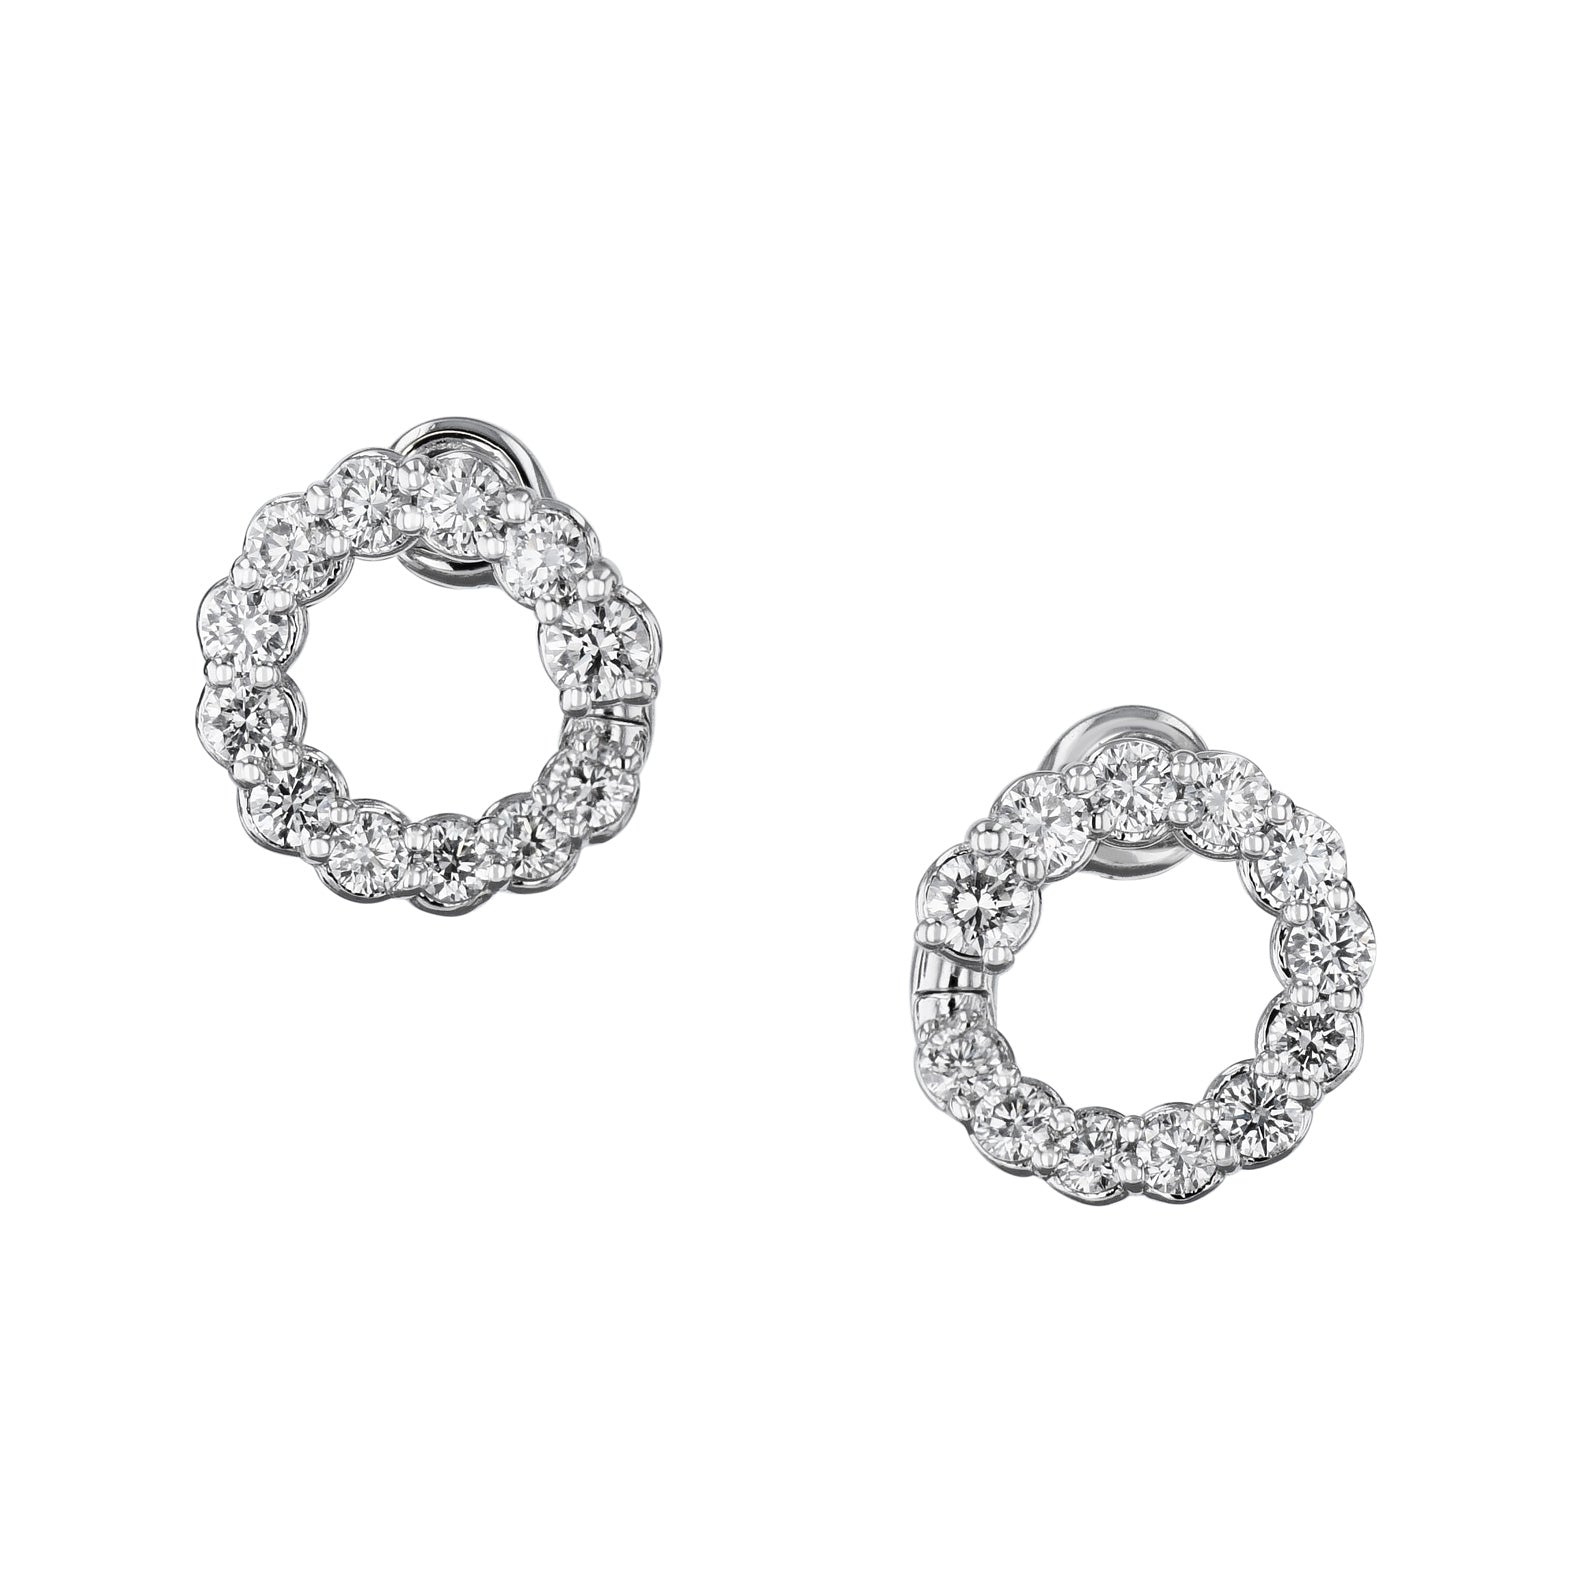 White Gold Diamond Earrings Earrings Curated by H